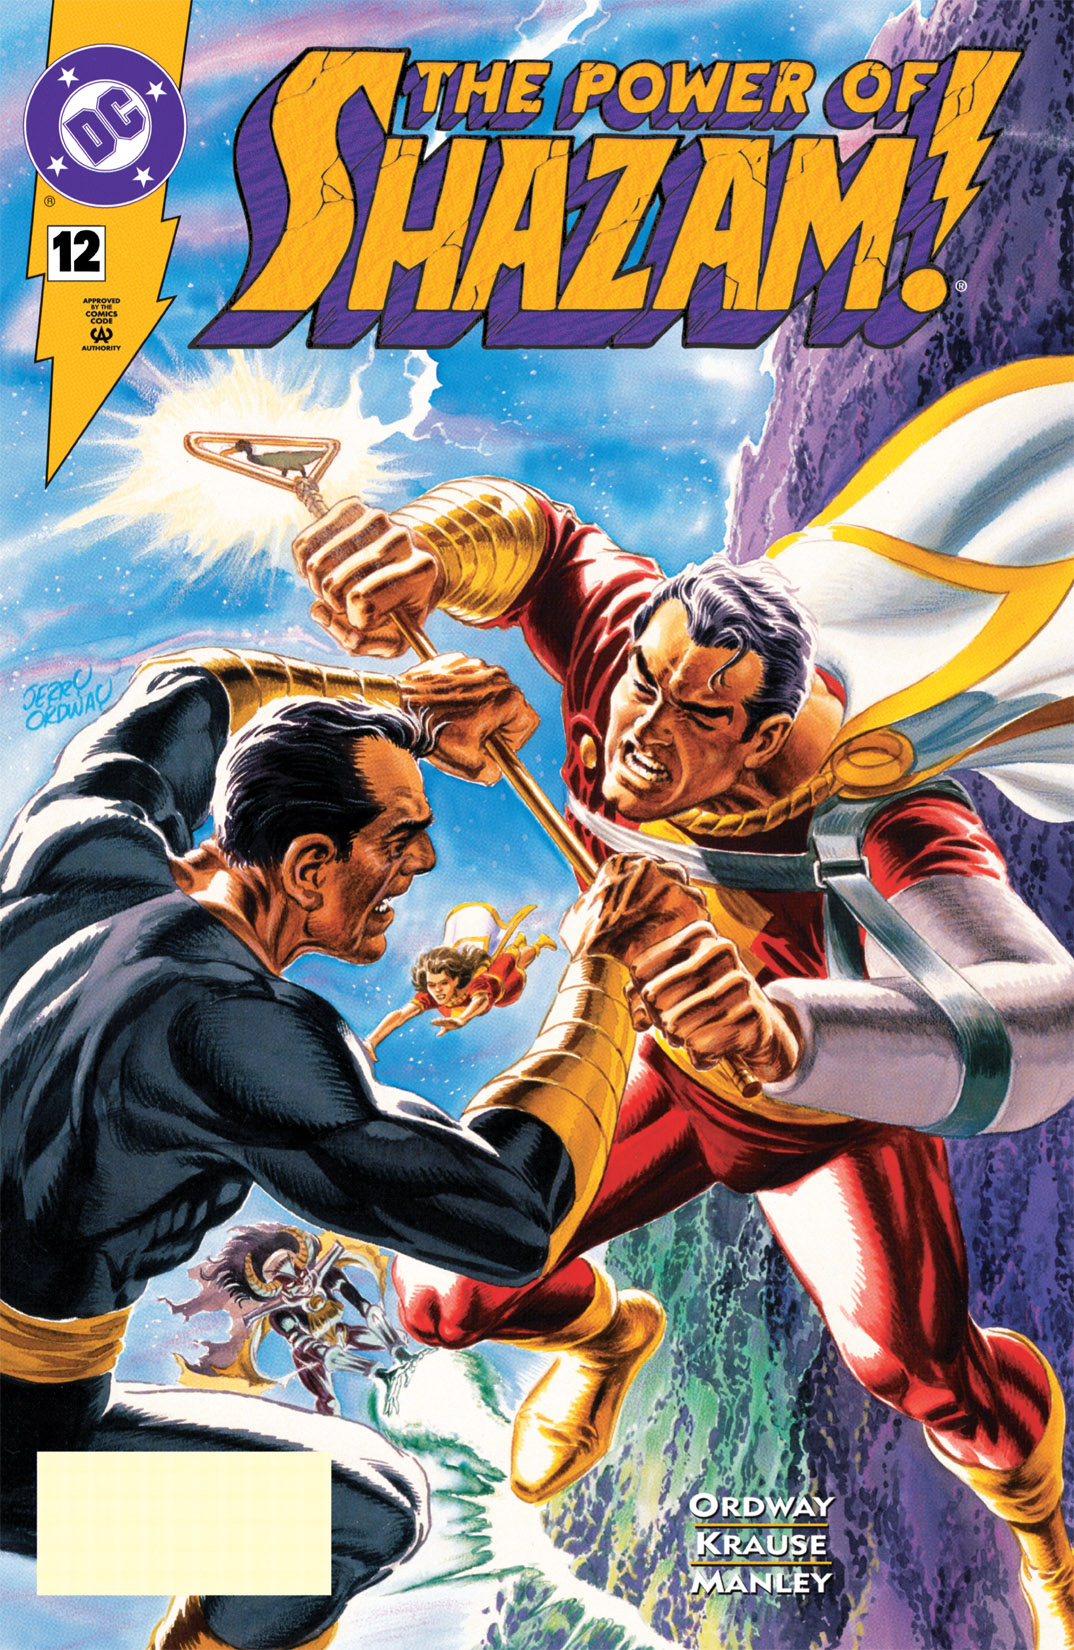 Read online The Power of SHAZAM! comic -  Issue #12 - 1